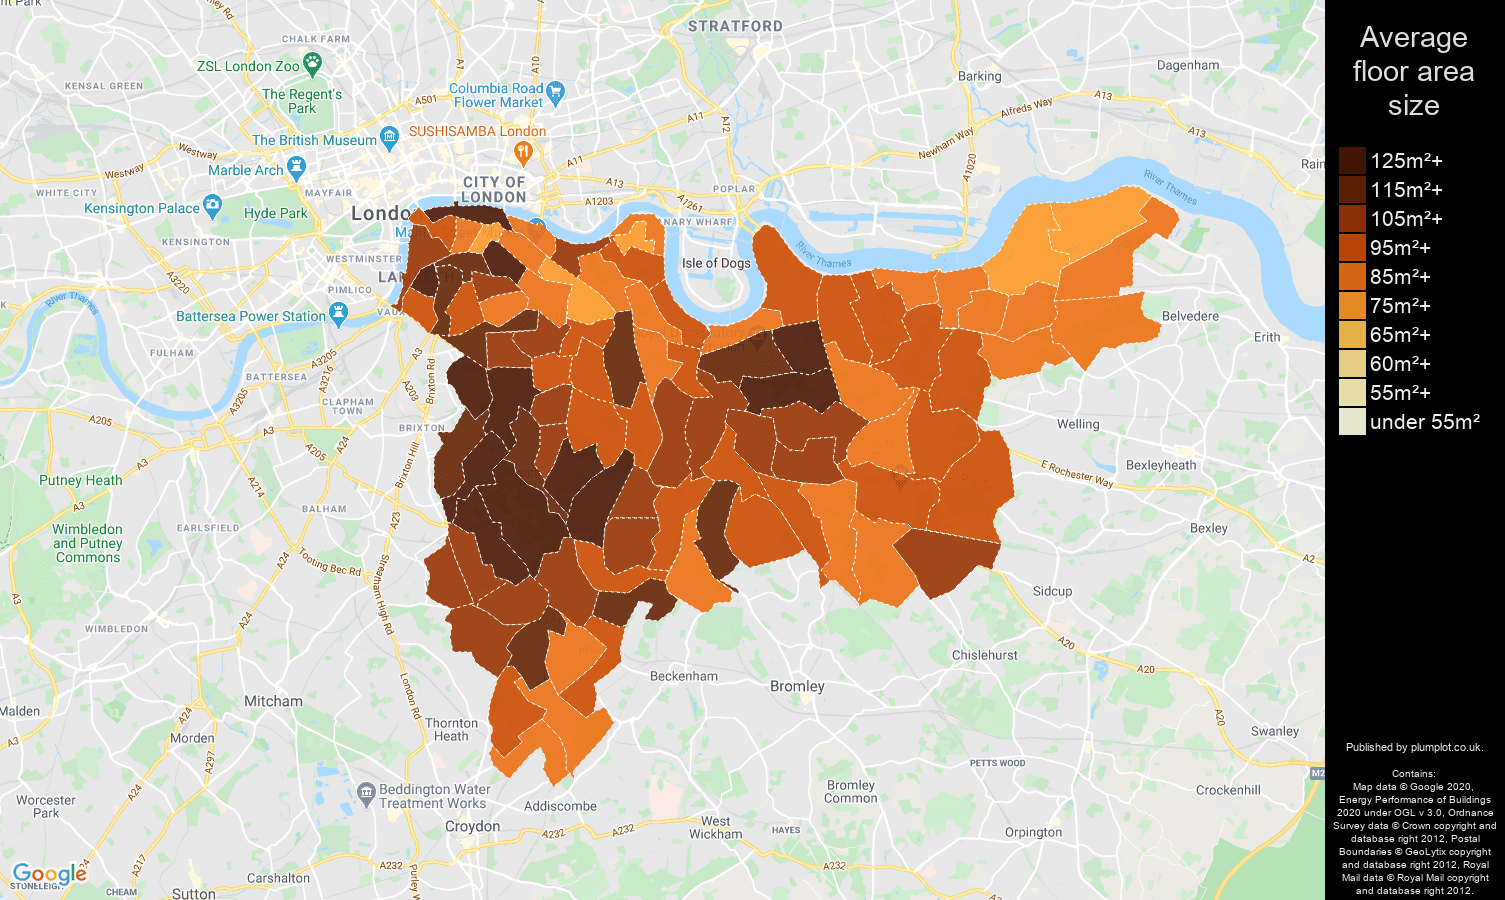 South East London map of average floor area size of houses